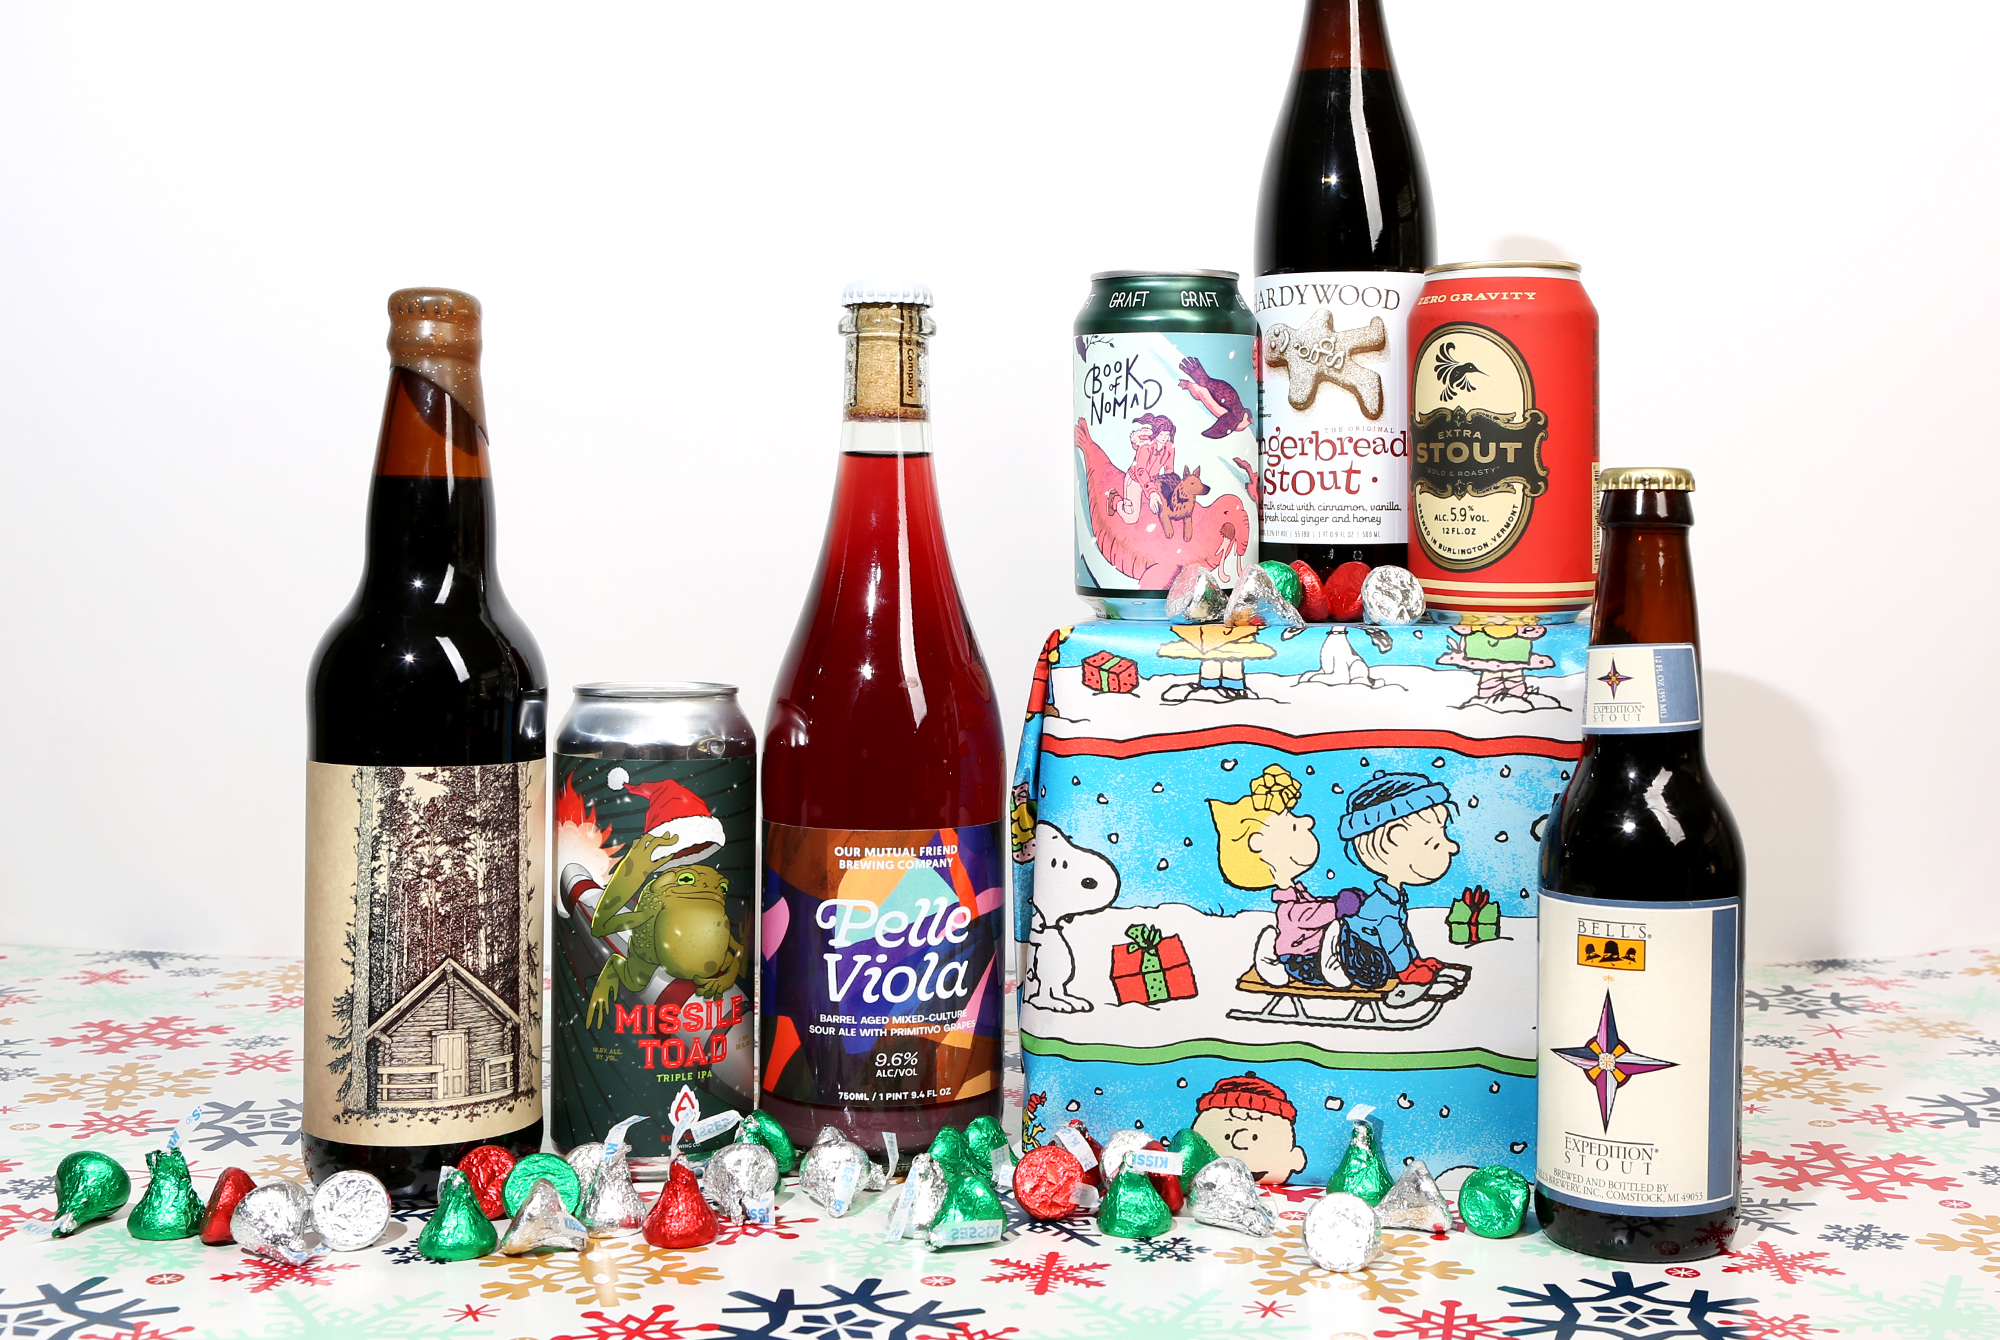 The 20 Best Beers to Drink This Winter